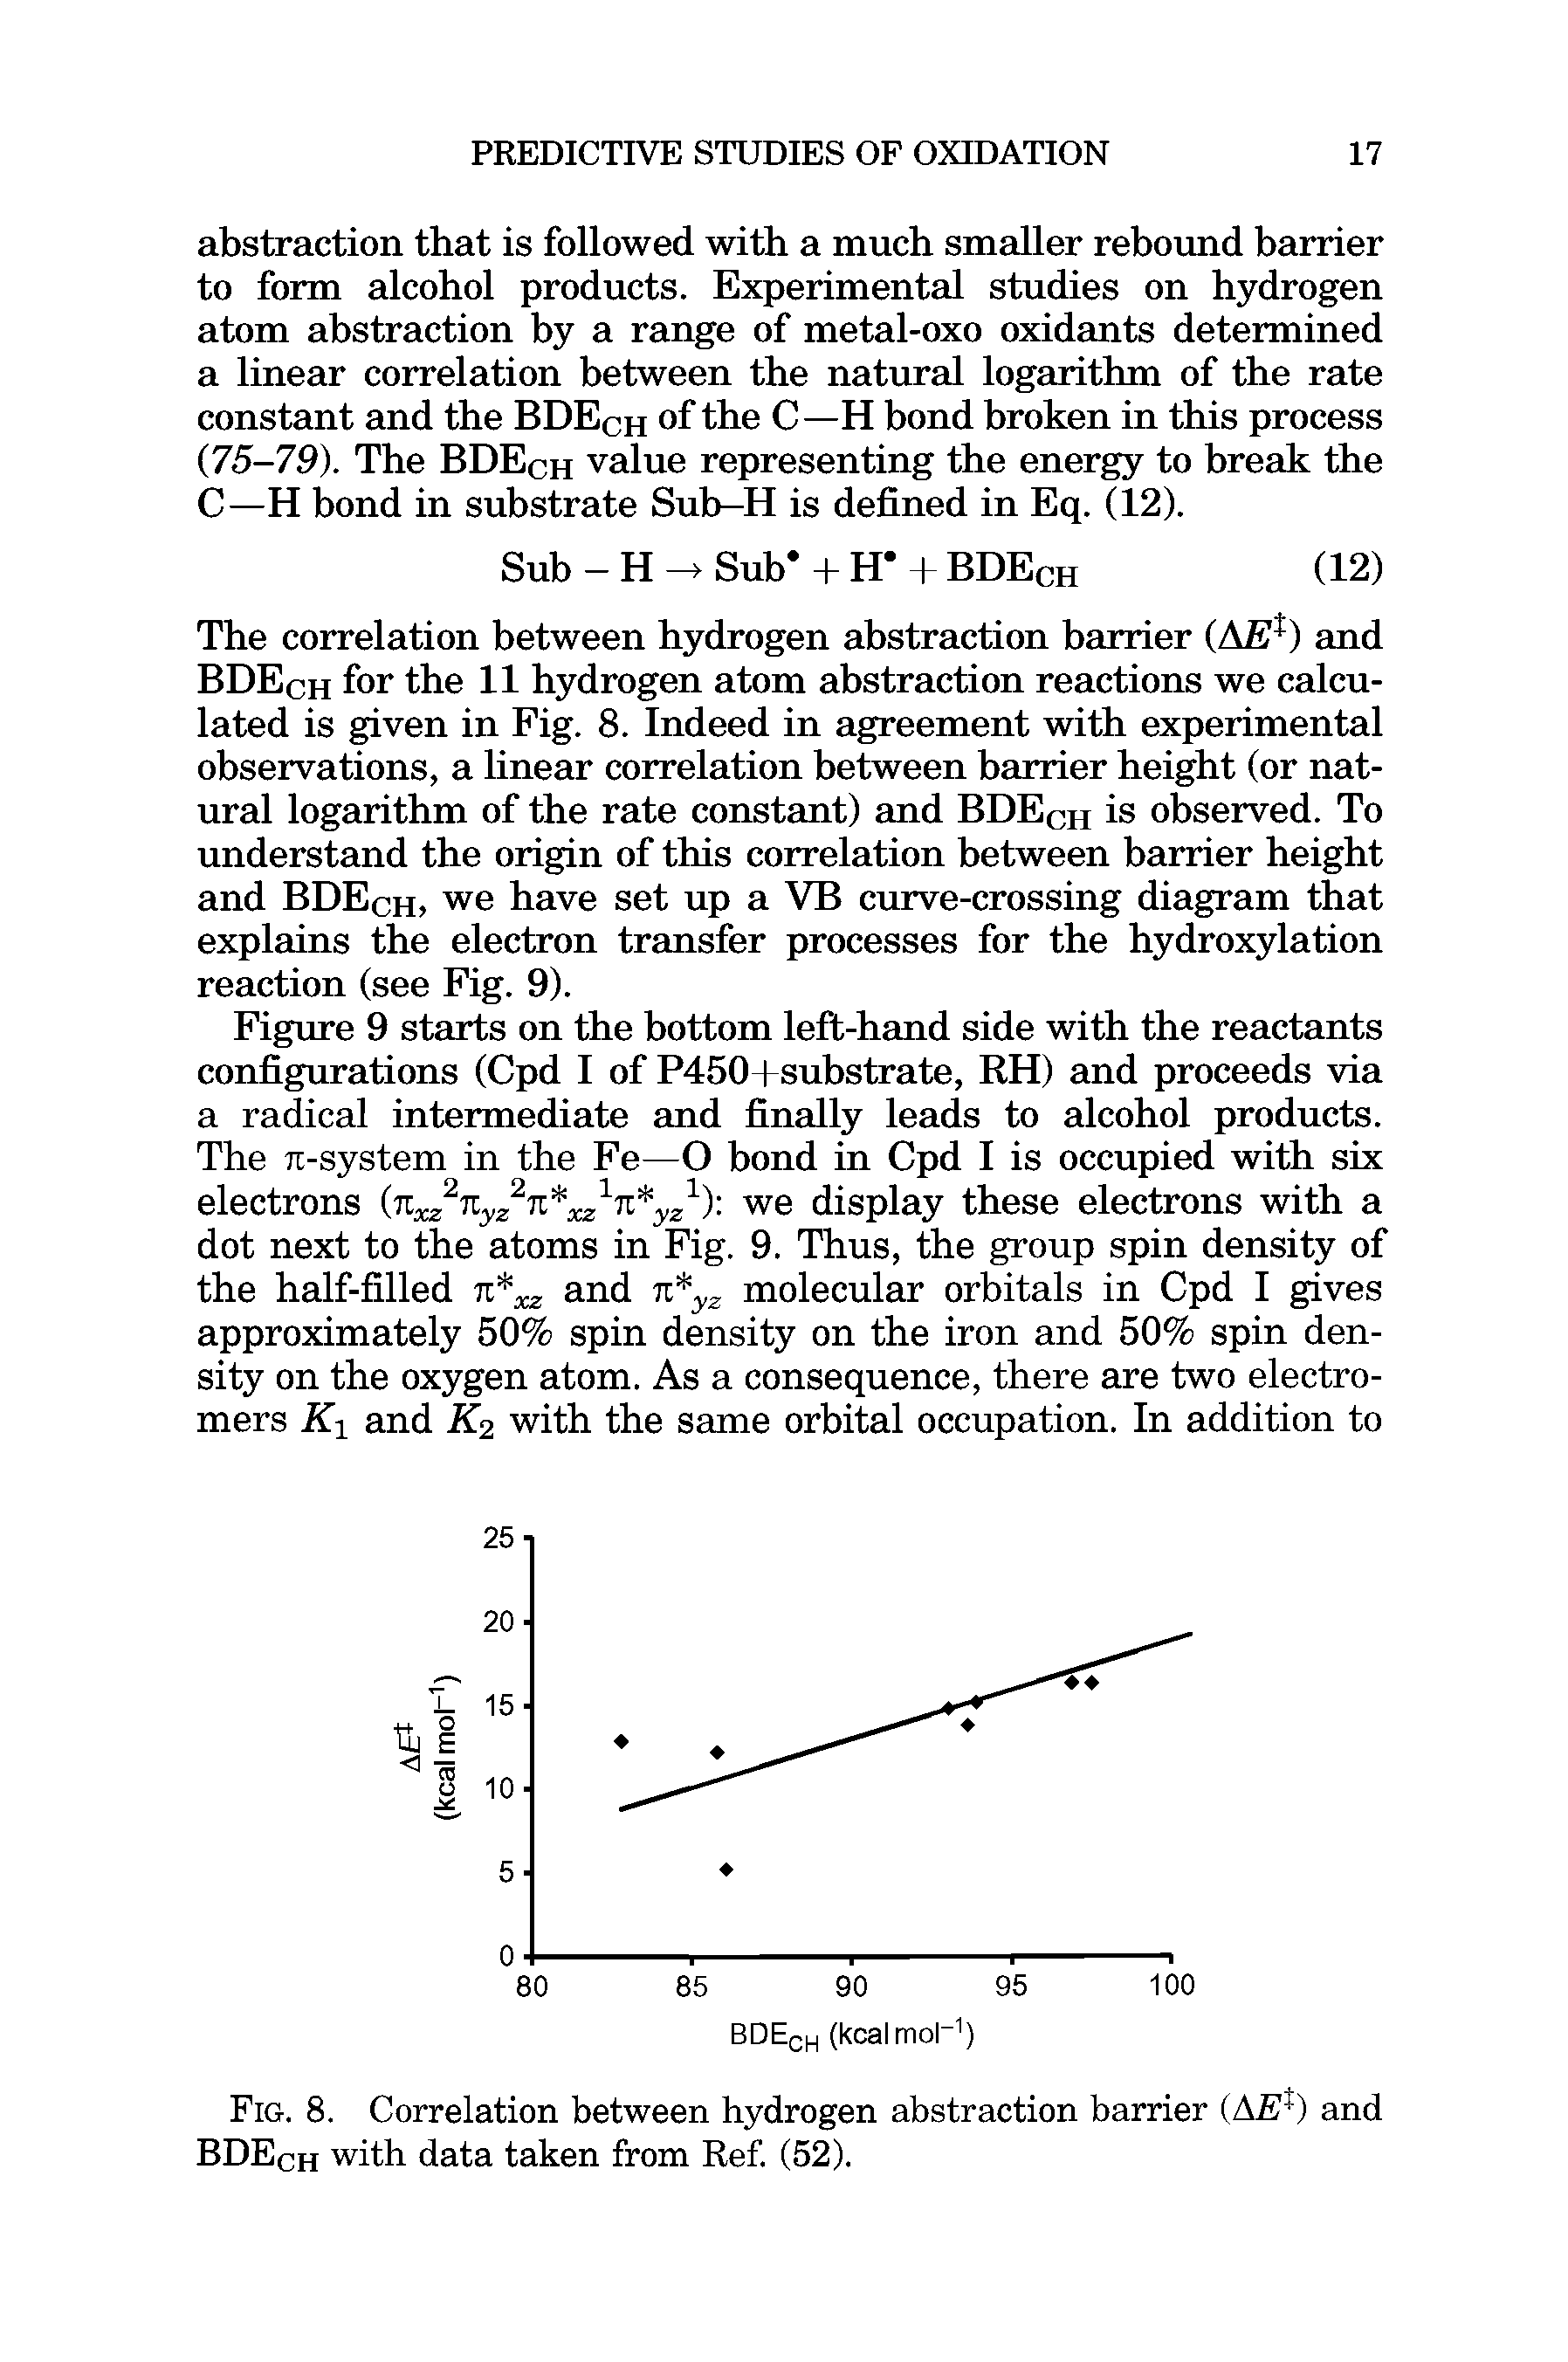 Fig. 8. Correlation between hydrogen abstraction barrier (AE ) and BDEch with data taken from Ref. (52).